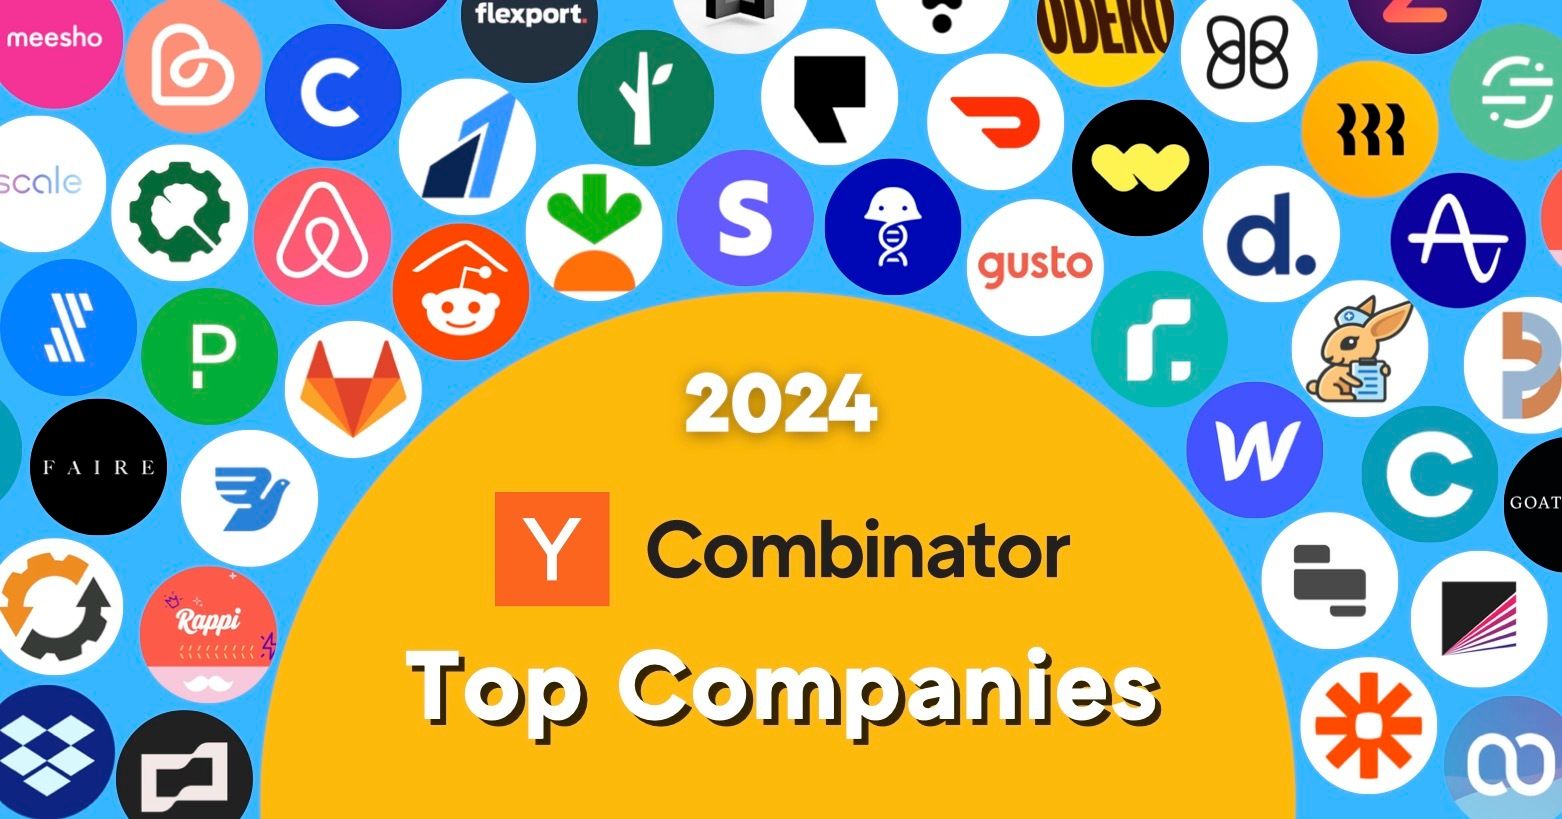 Congratulations to the 2024 YC Top Companies!